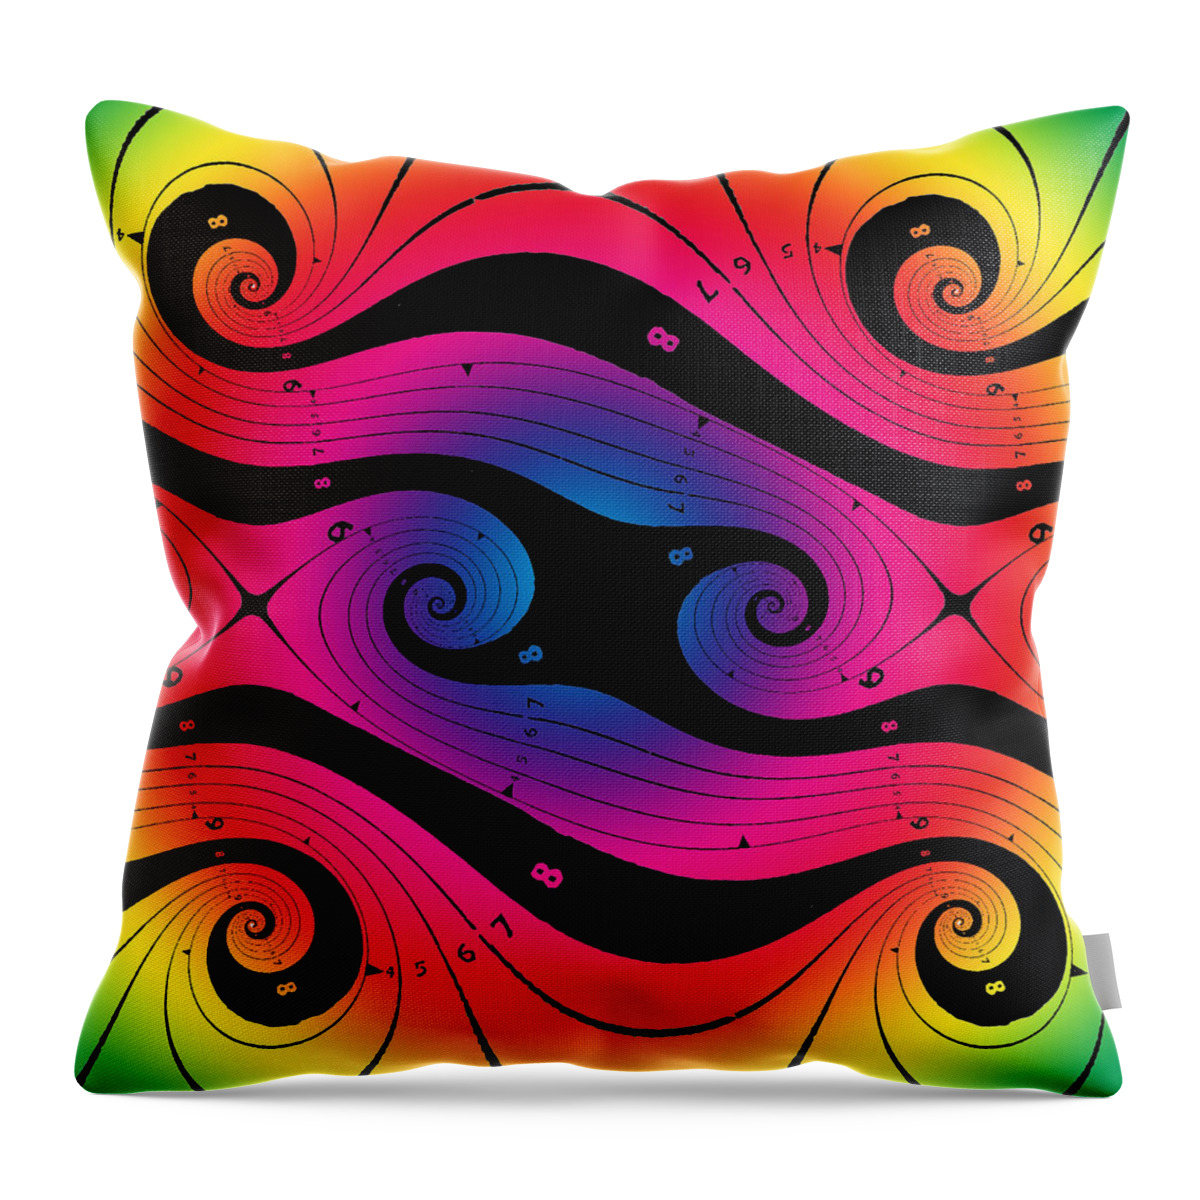 Digital Collage Throw Pillow featuring the digital art Fractal Color Spiral I by Eric Edelman